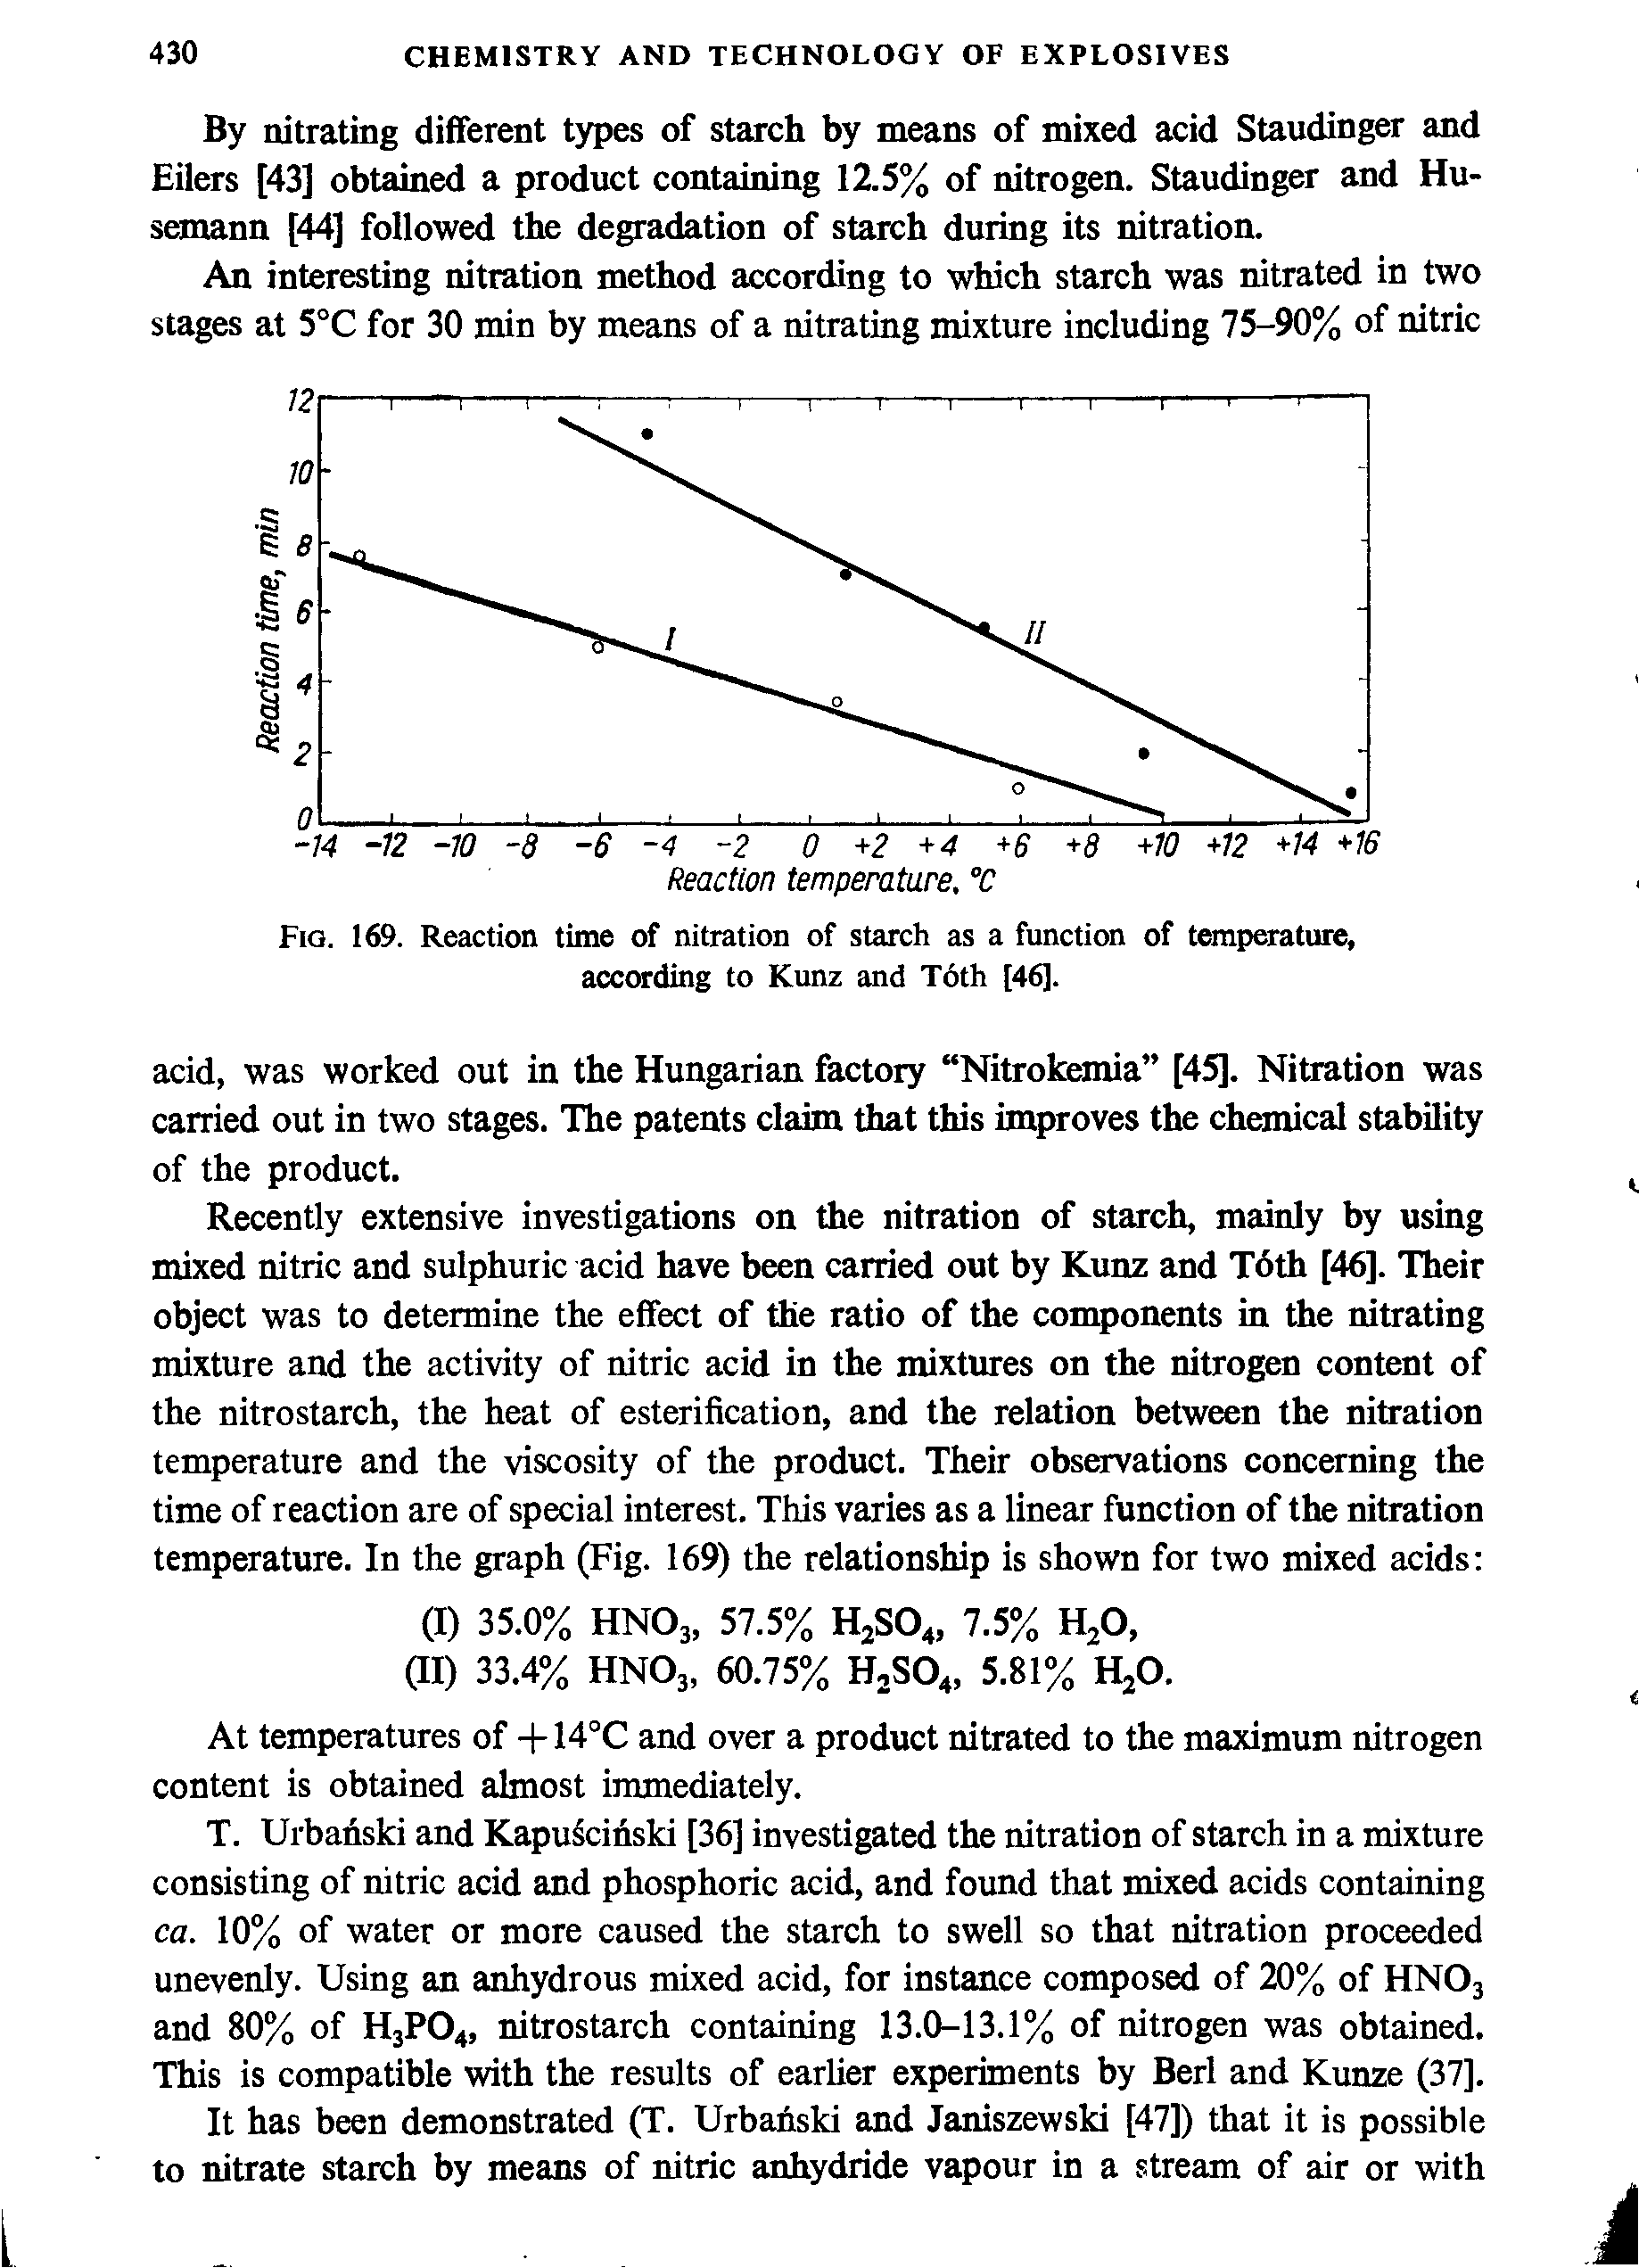 Fig. 169. Reaction time of nitration of starch as a function of temperature, according to Kunz and T6th [46].